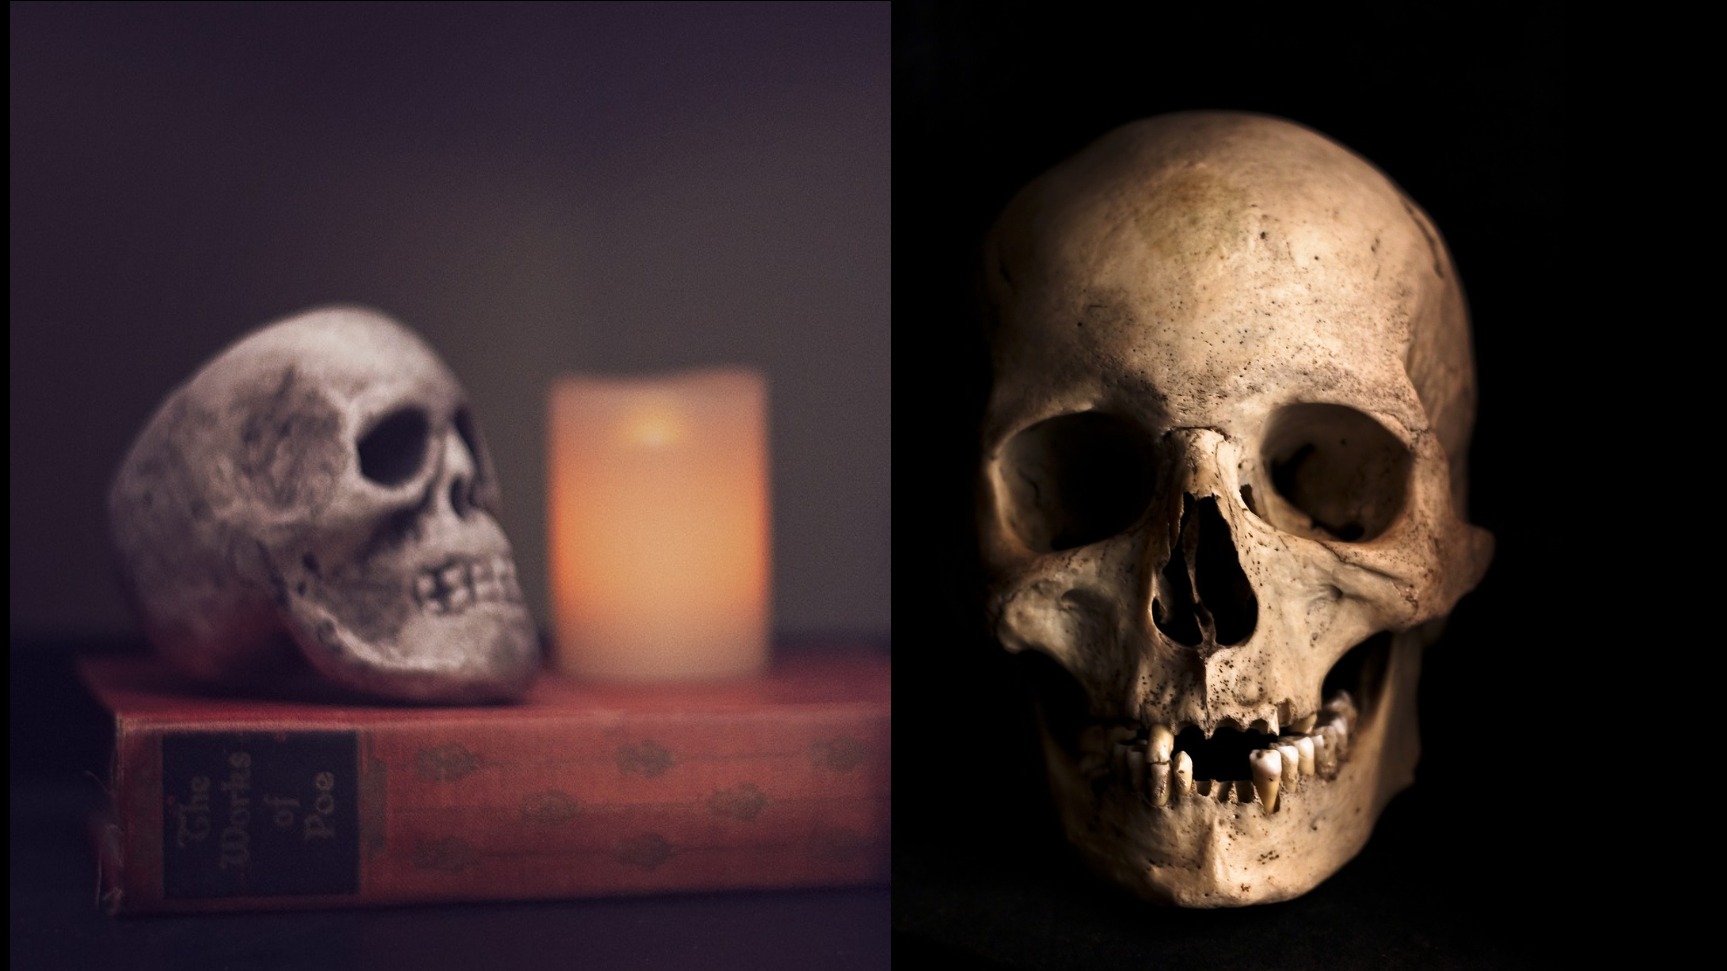 Skulls and a candle